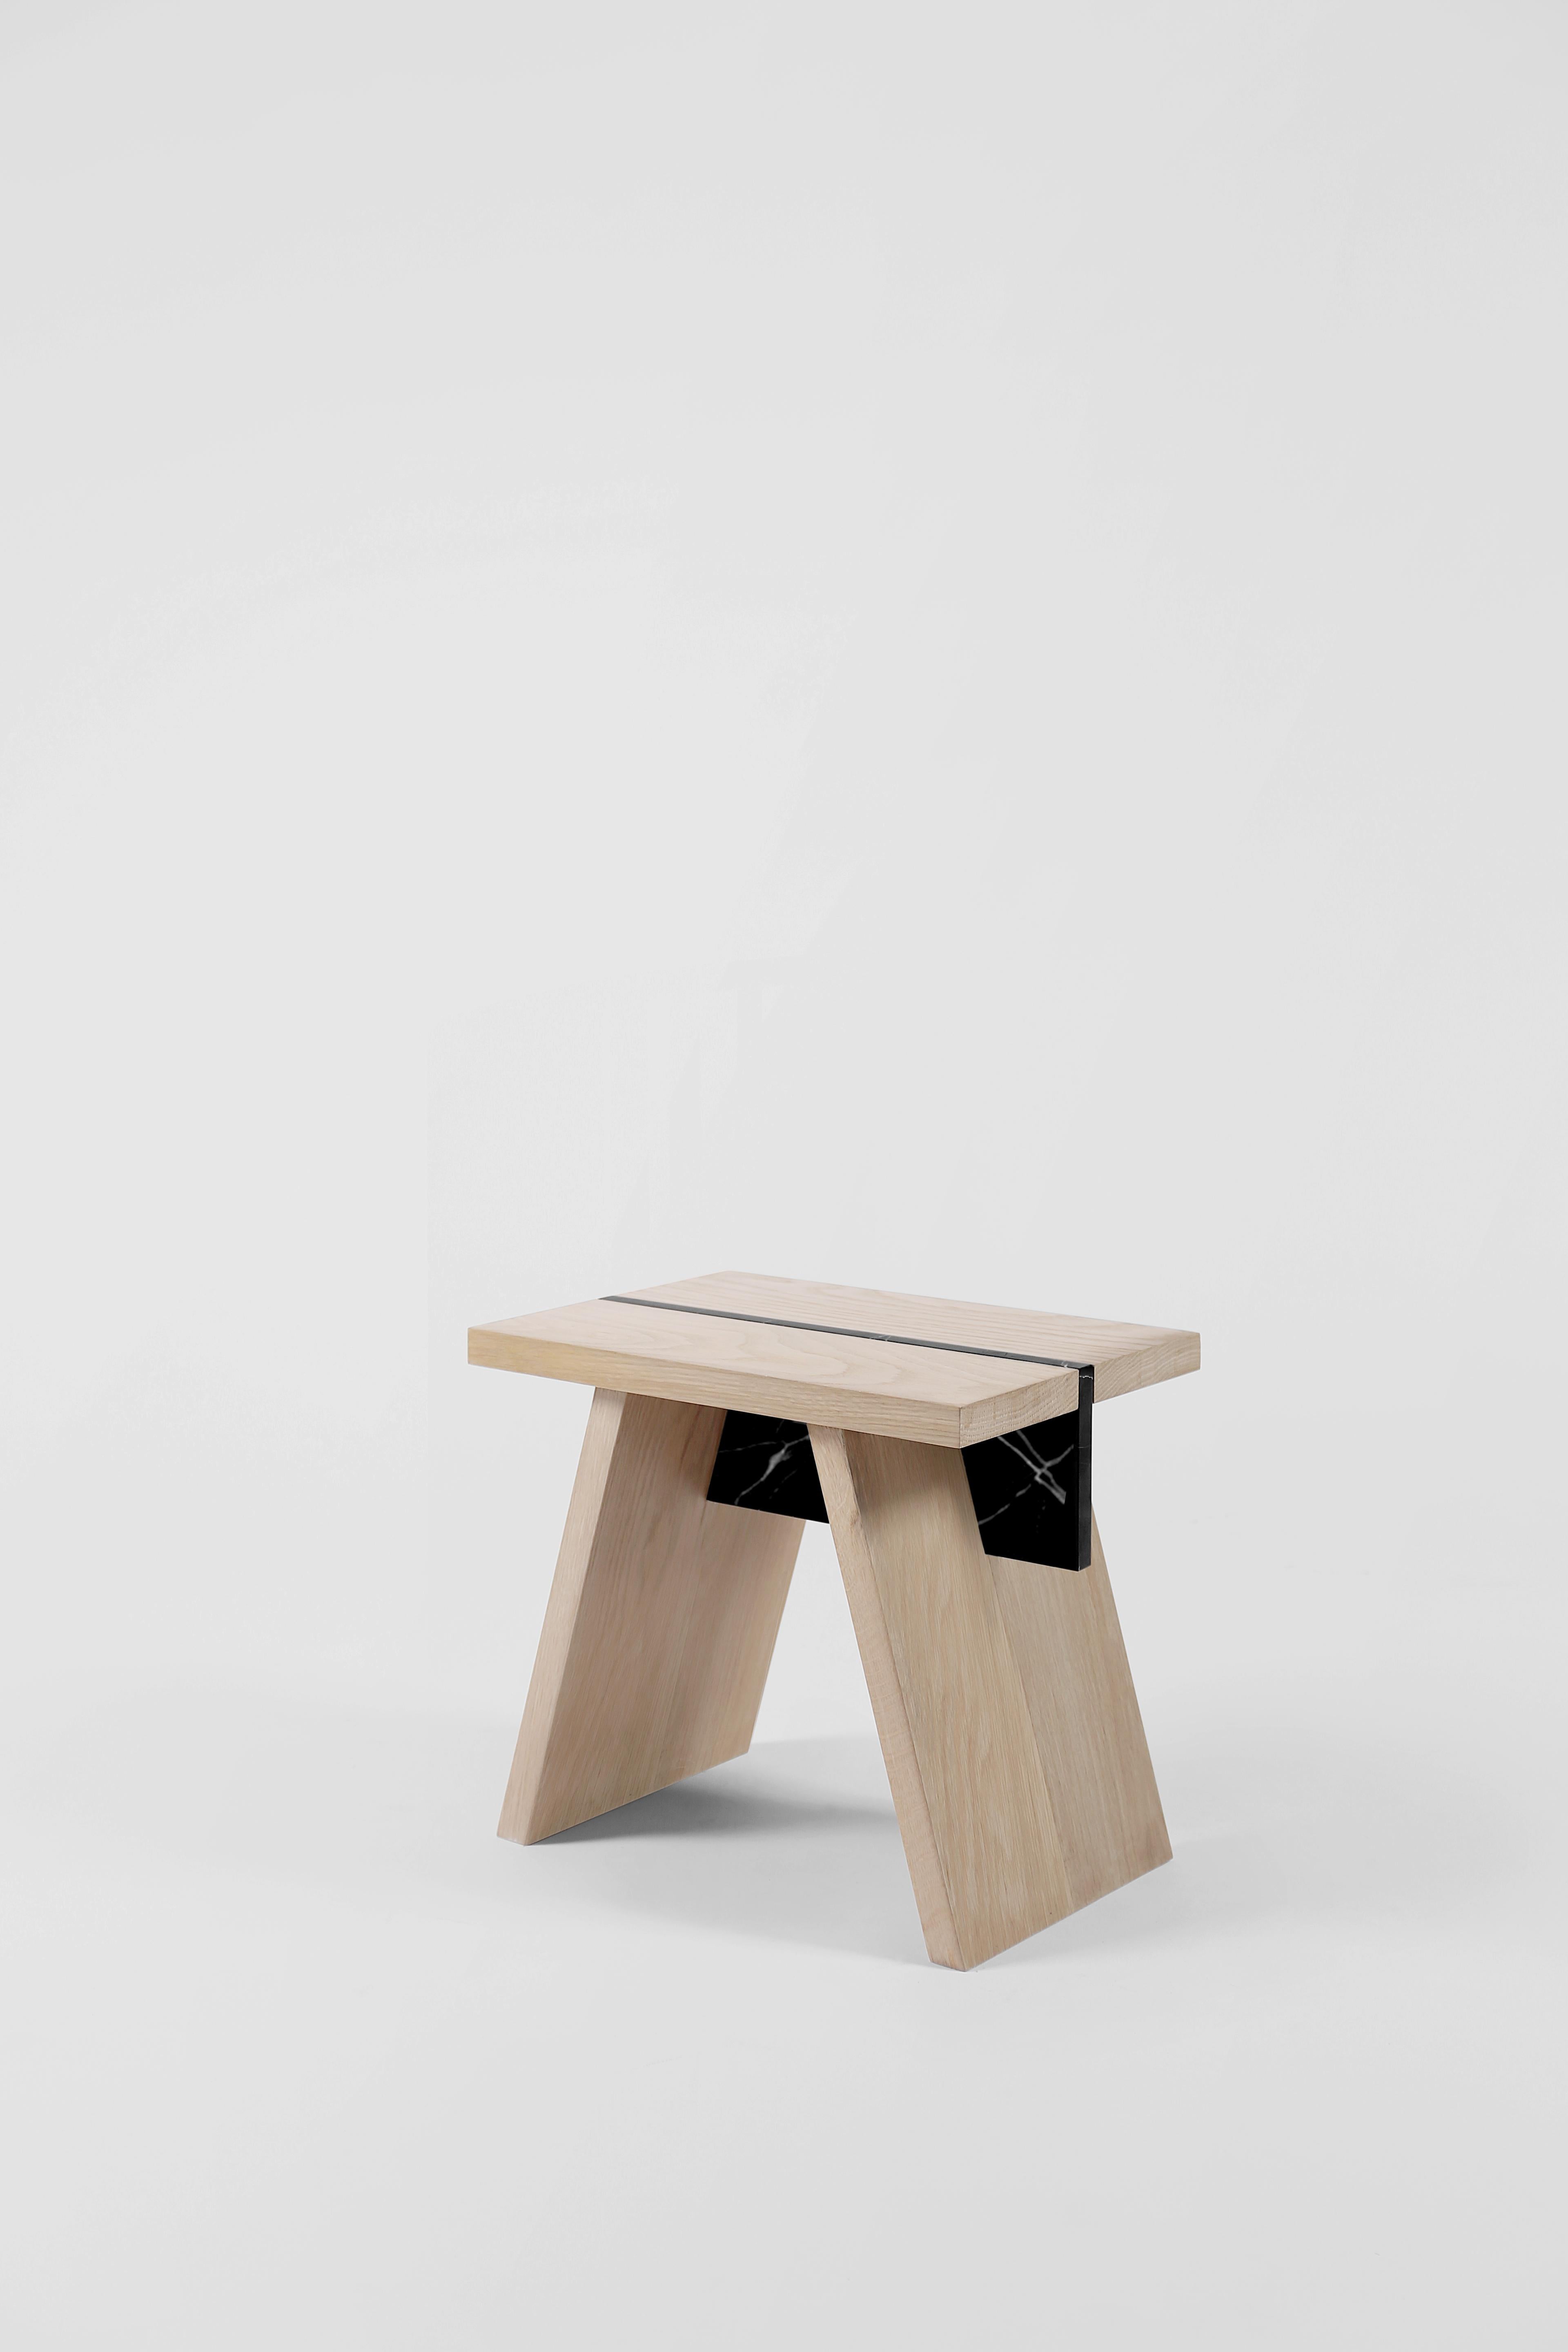 Fuerza stool by Joel Escalona
Limited Edition of 9
Dimensions: D 40 x W 32 x H 45 cm
Materials: oak wood, Negro Monterrey marble.

Solid white oak and Negro Monterrey marble stool.

Joel Escalona
He was born in Mexico City and studied